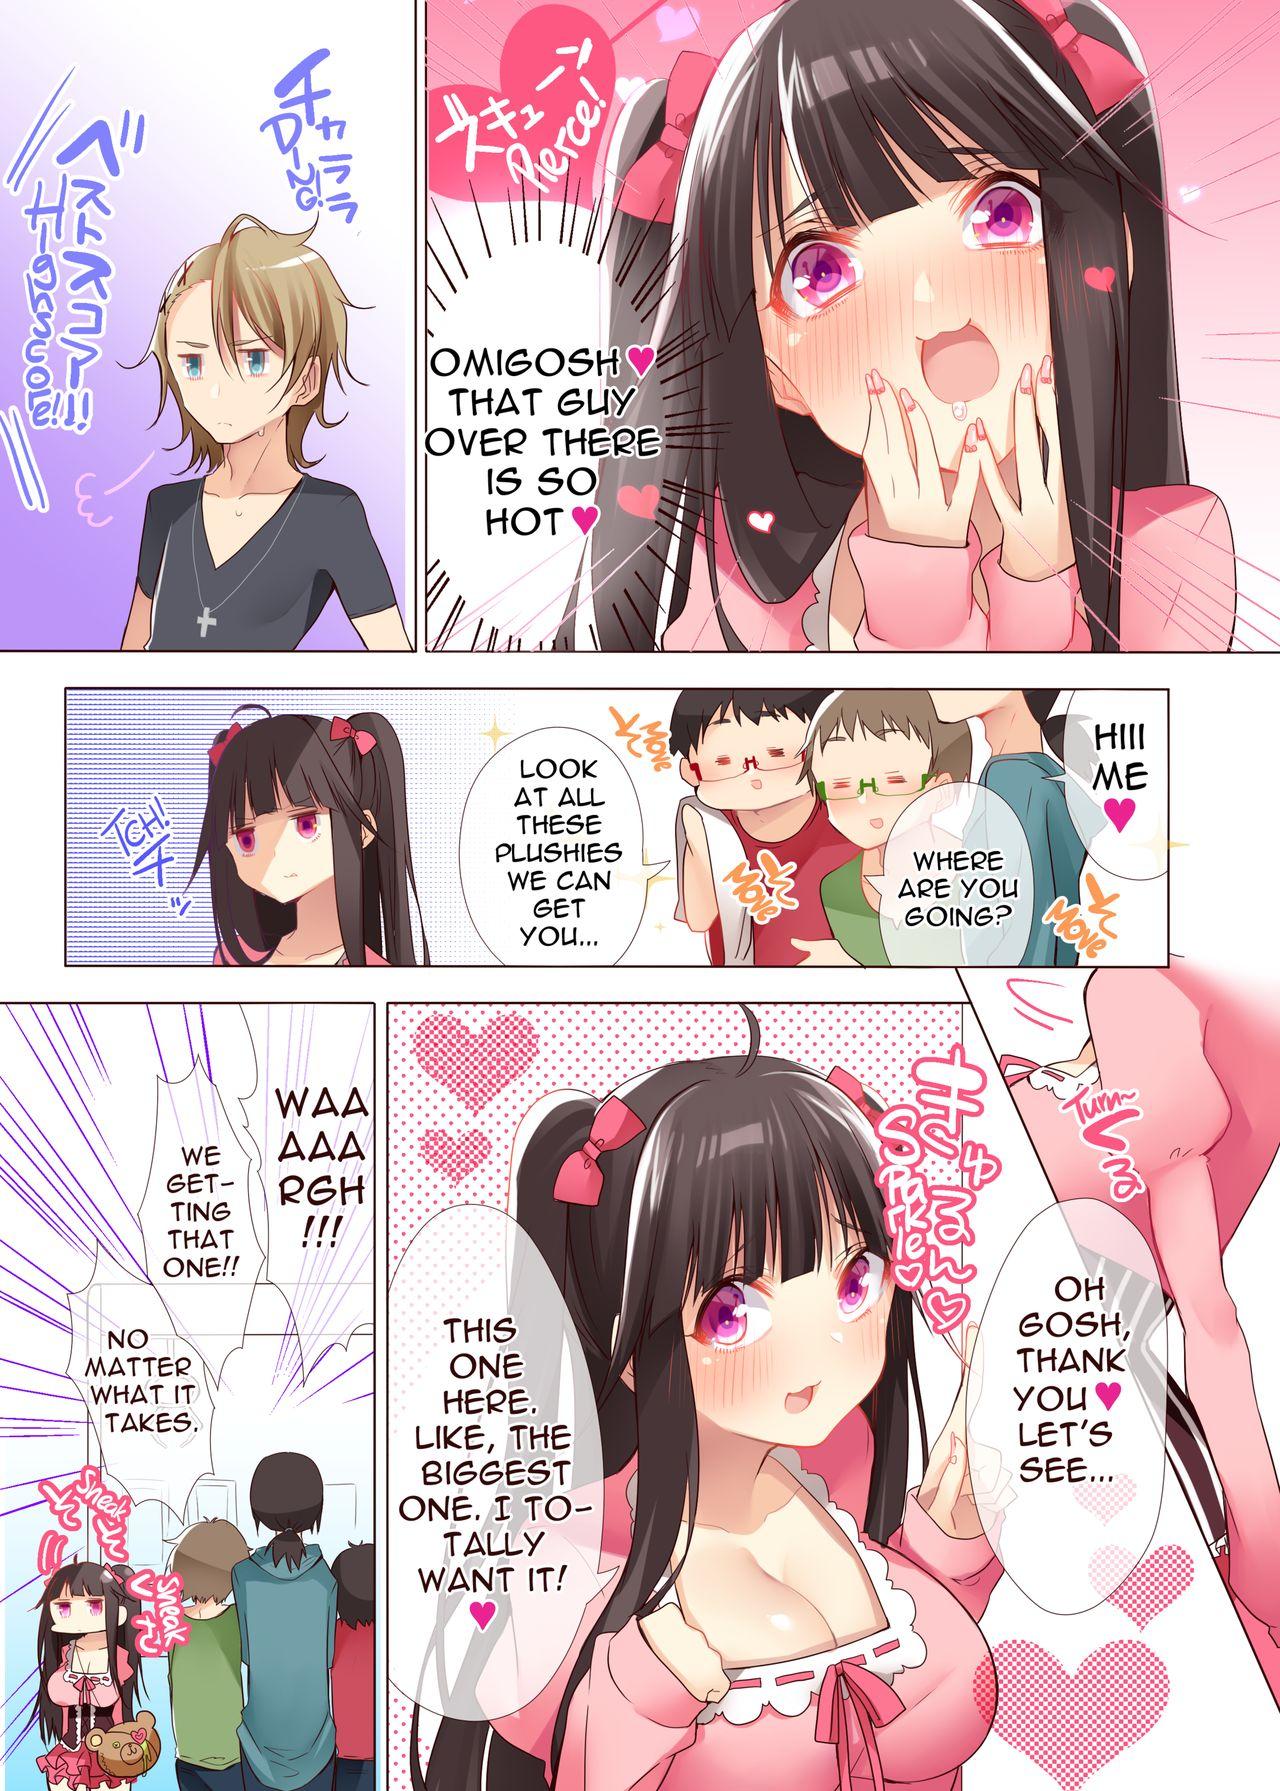 Cum On Pussy The Princess of an Otaku Group Got Knocked Up by Some Piece of Trash So She Let an Otaku Guy Do Her Too!? - Original Roleplay - Page 4